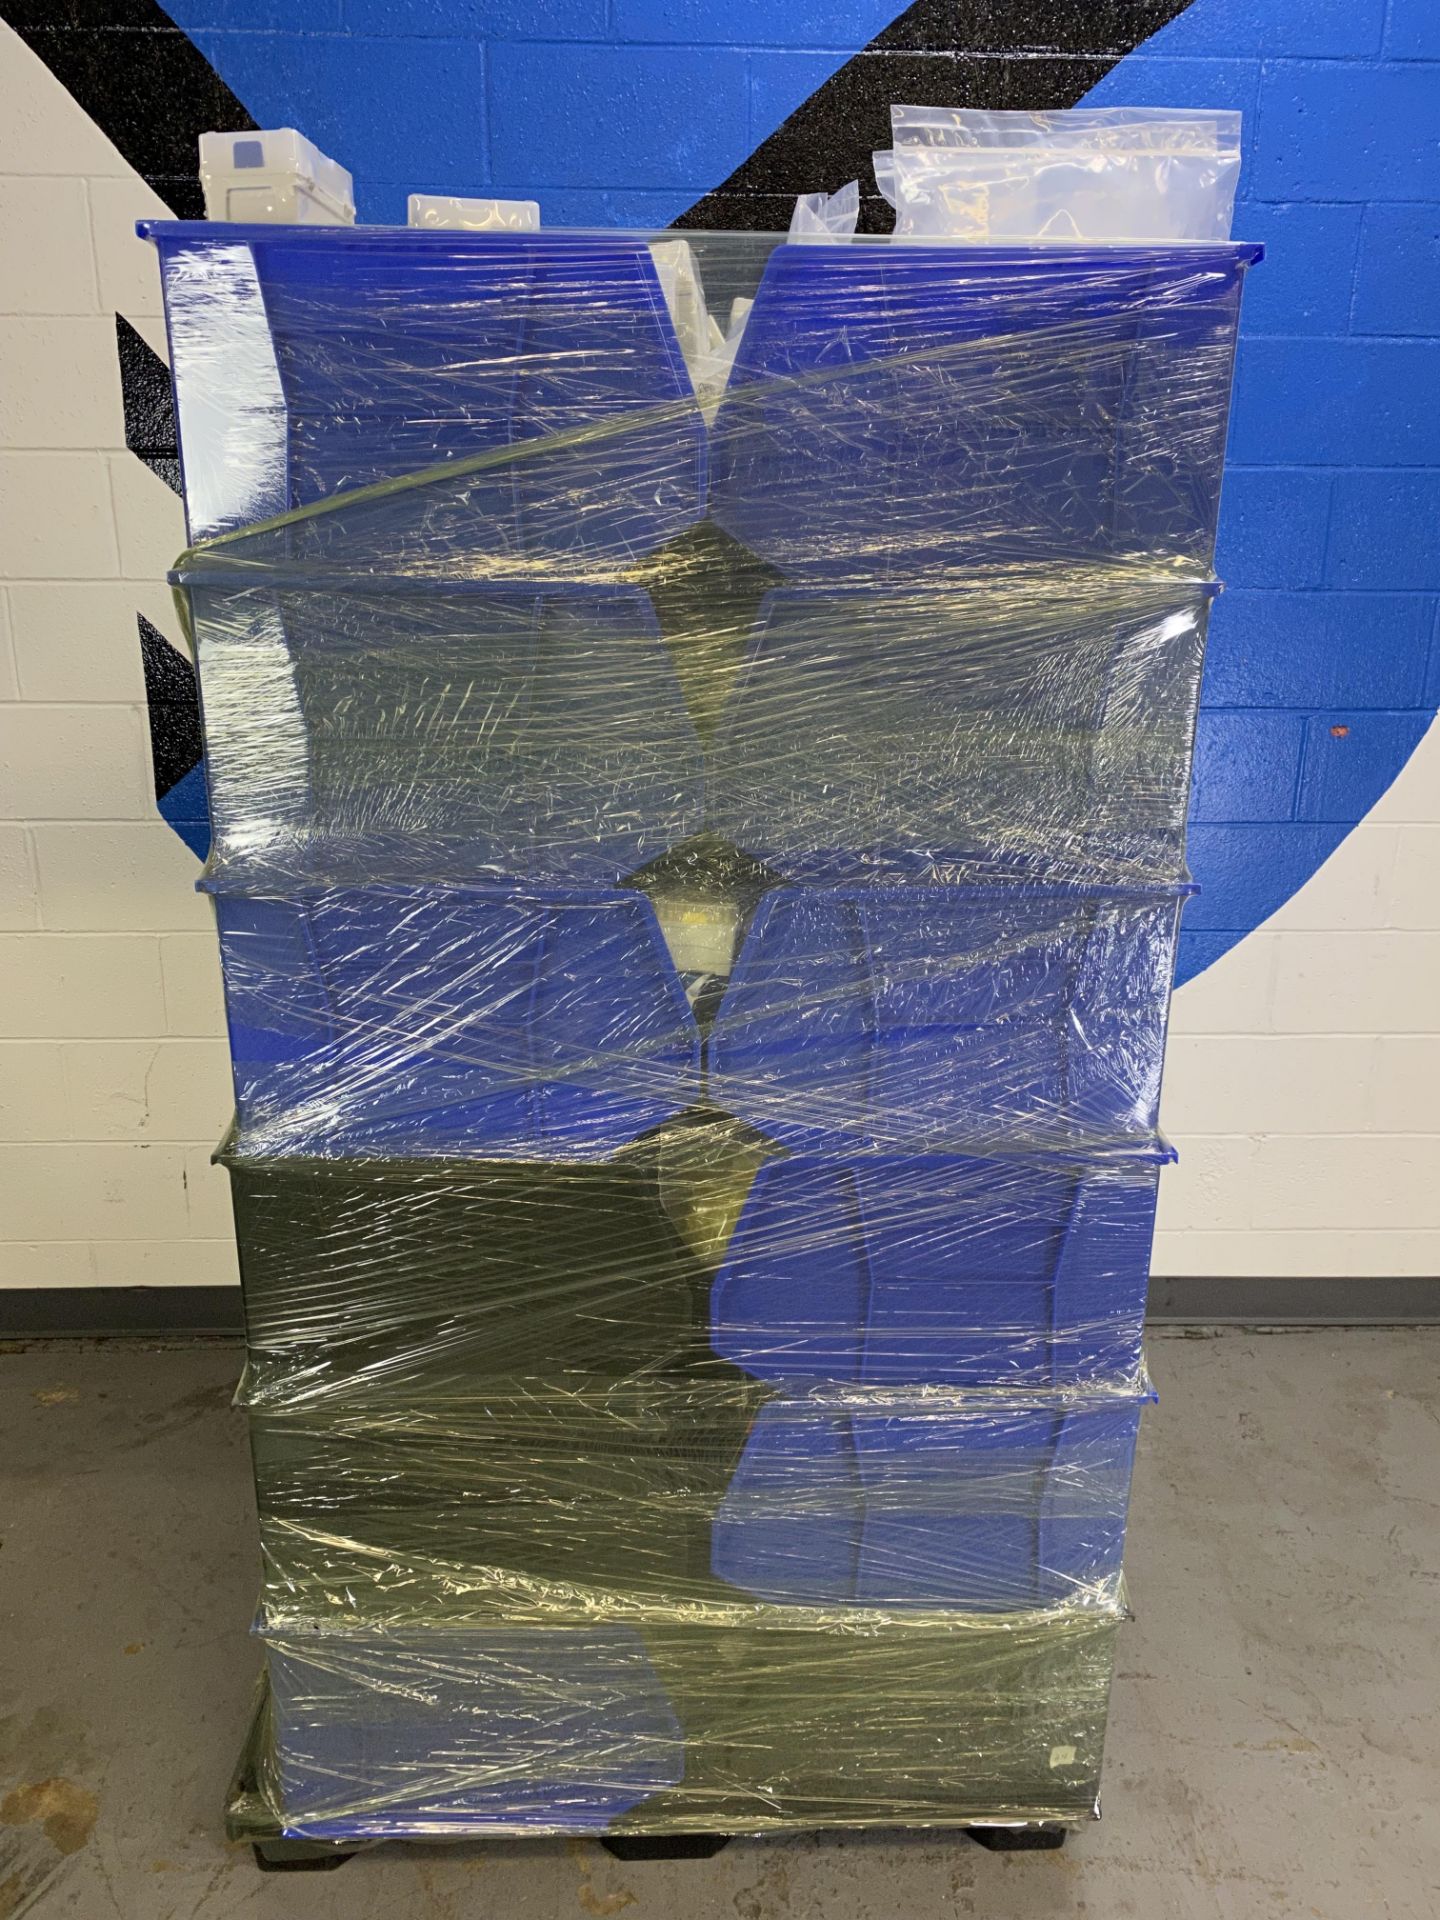 {LOT} Of Consumables on Pallet of Approx. 24 Boxes c/o: Blue and Black Bins, Assorted Filter Pipette